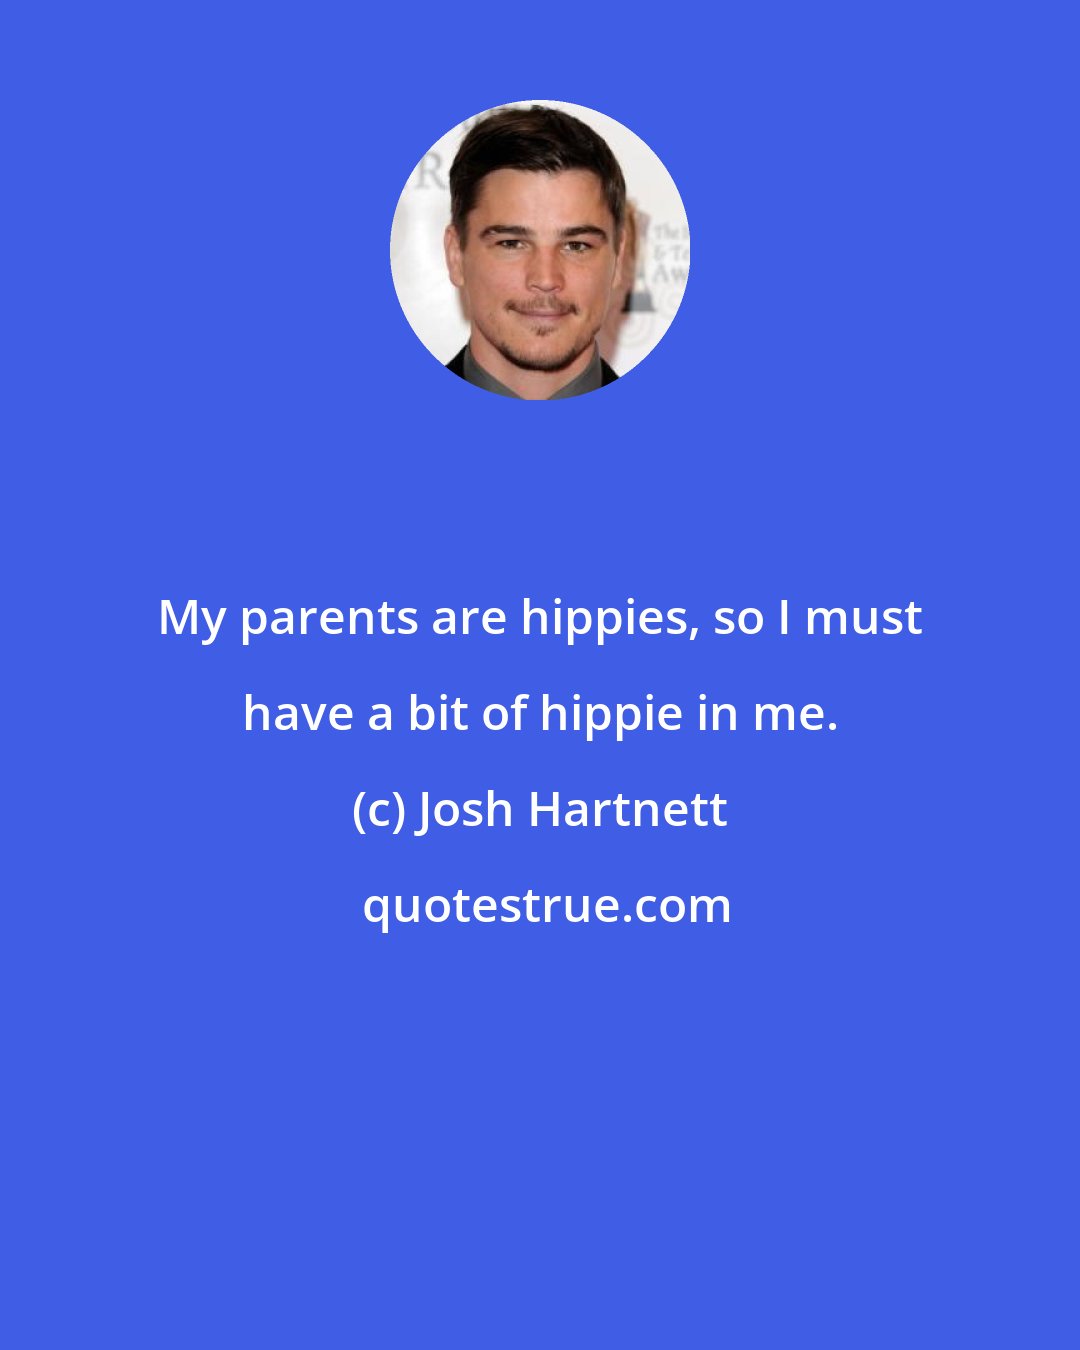 Josh Hartnett: My parents are hippies, so I must have a bit of hippie in me.